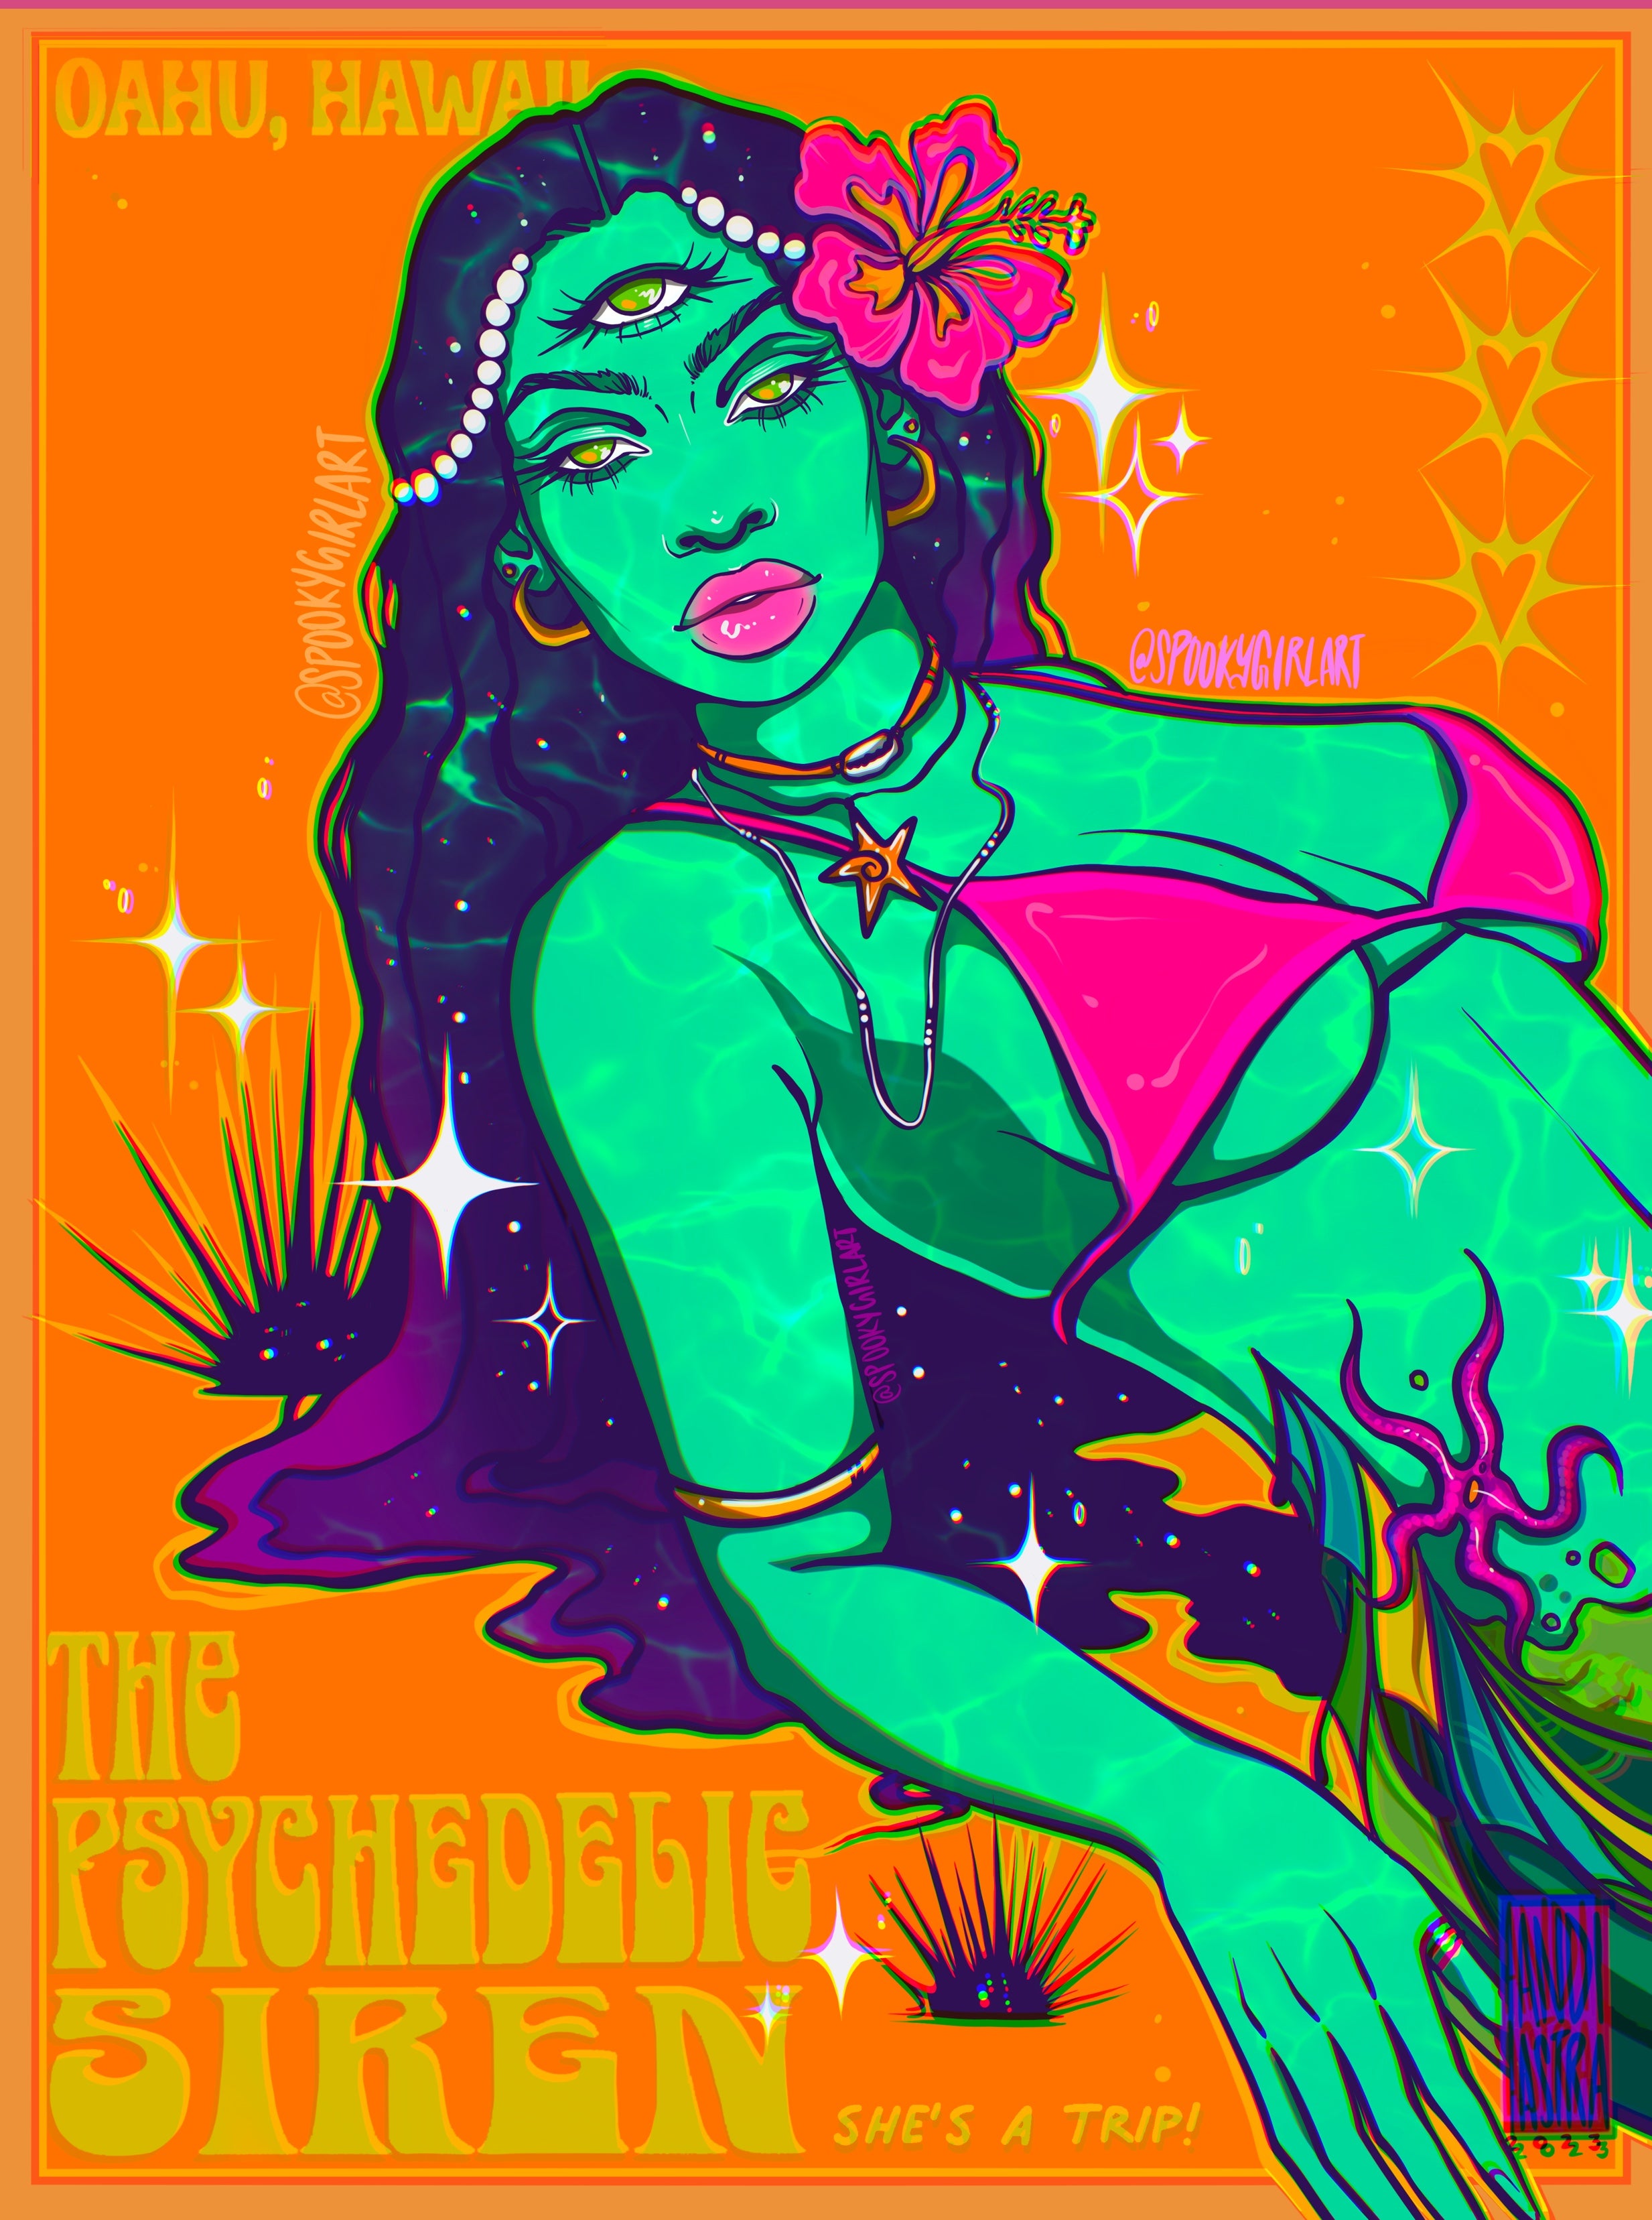 The Psychedelic Siren | Poster Print